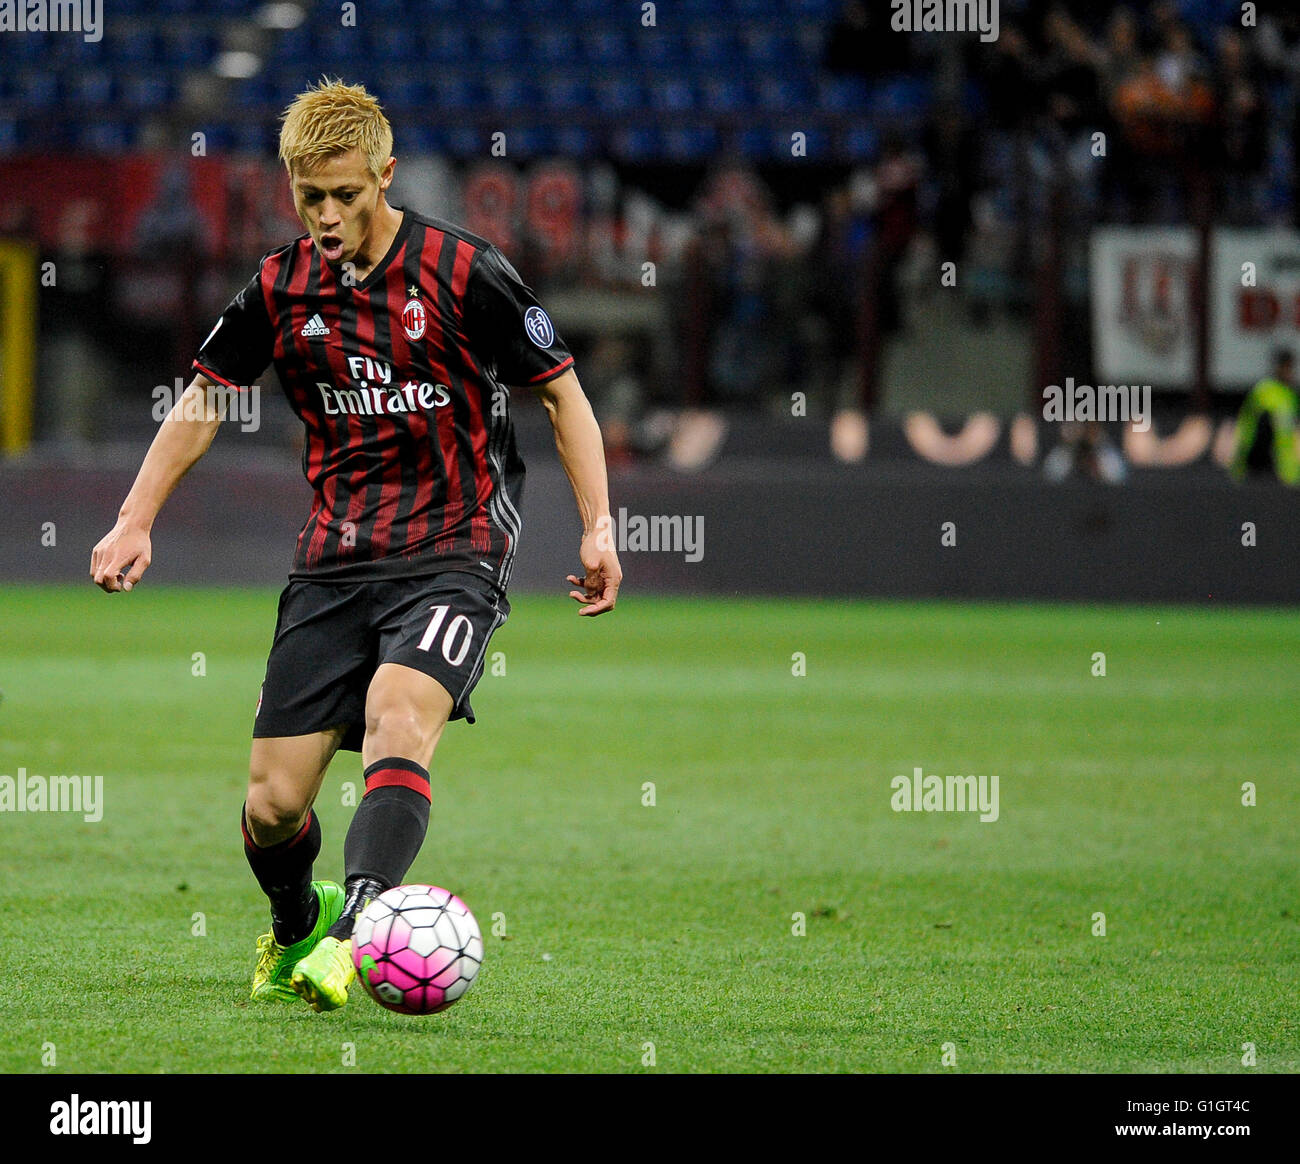 Milan, Italy. 14 may, 2016: Keisuke Honda in action during the Serie A footbll match between AC Milan and AS Roma. Credit:  Nicolò Campo/Alamy Live News Stock Photo